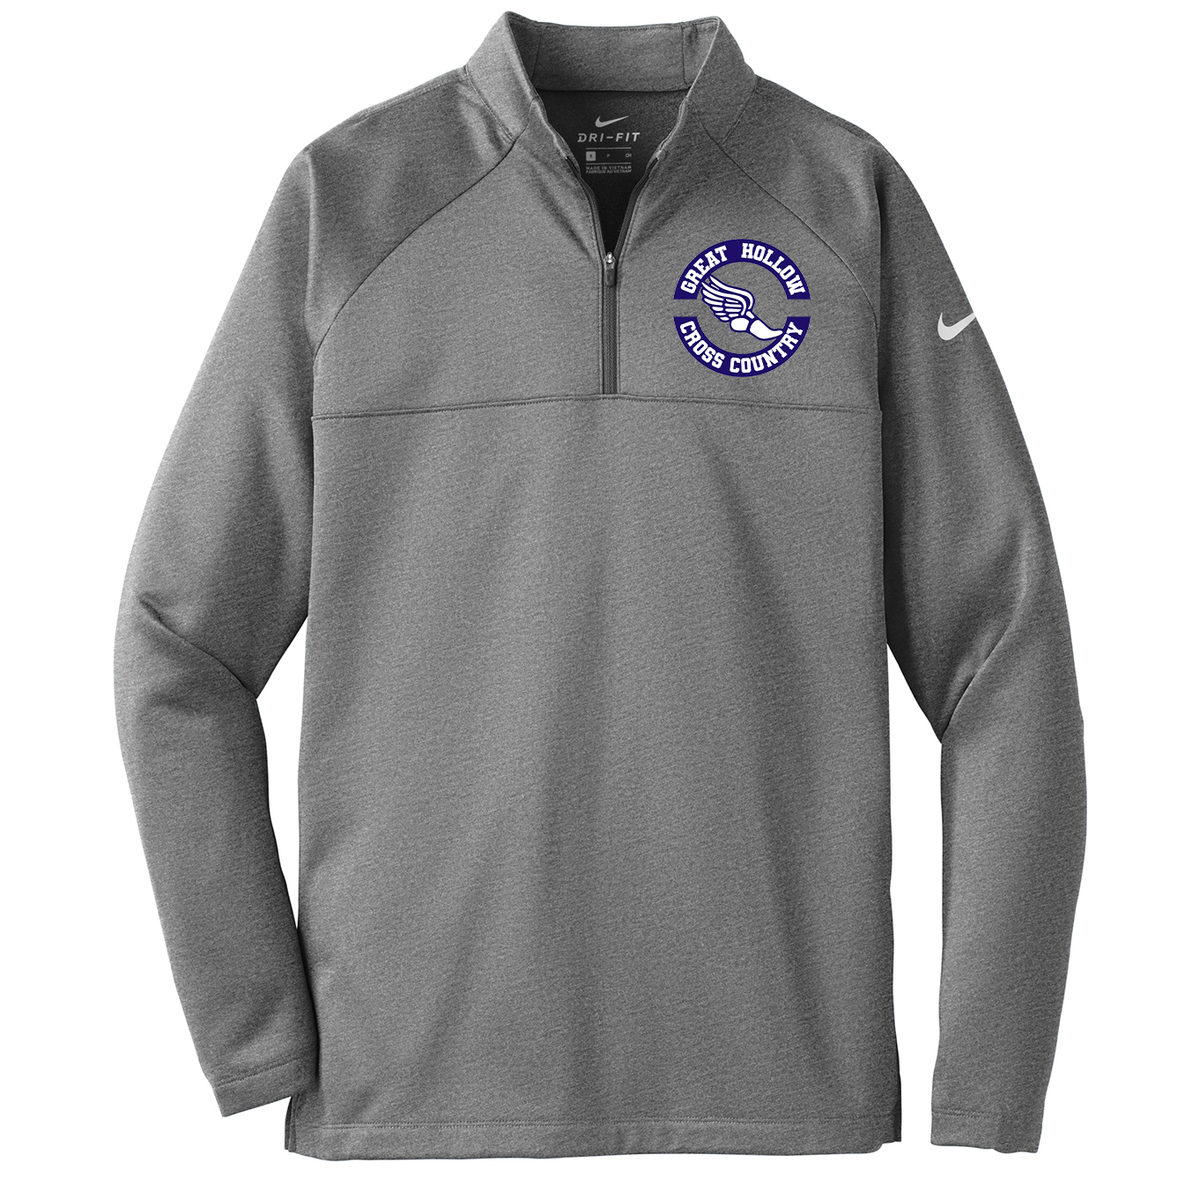 Great Hollow Cross Country Nike Therma-FIT Quarter-Zip Fleece